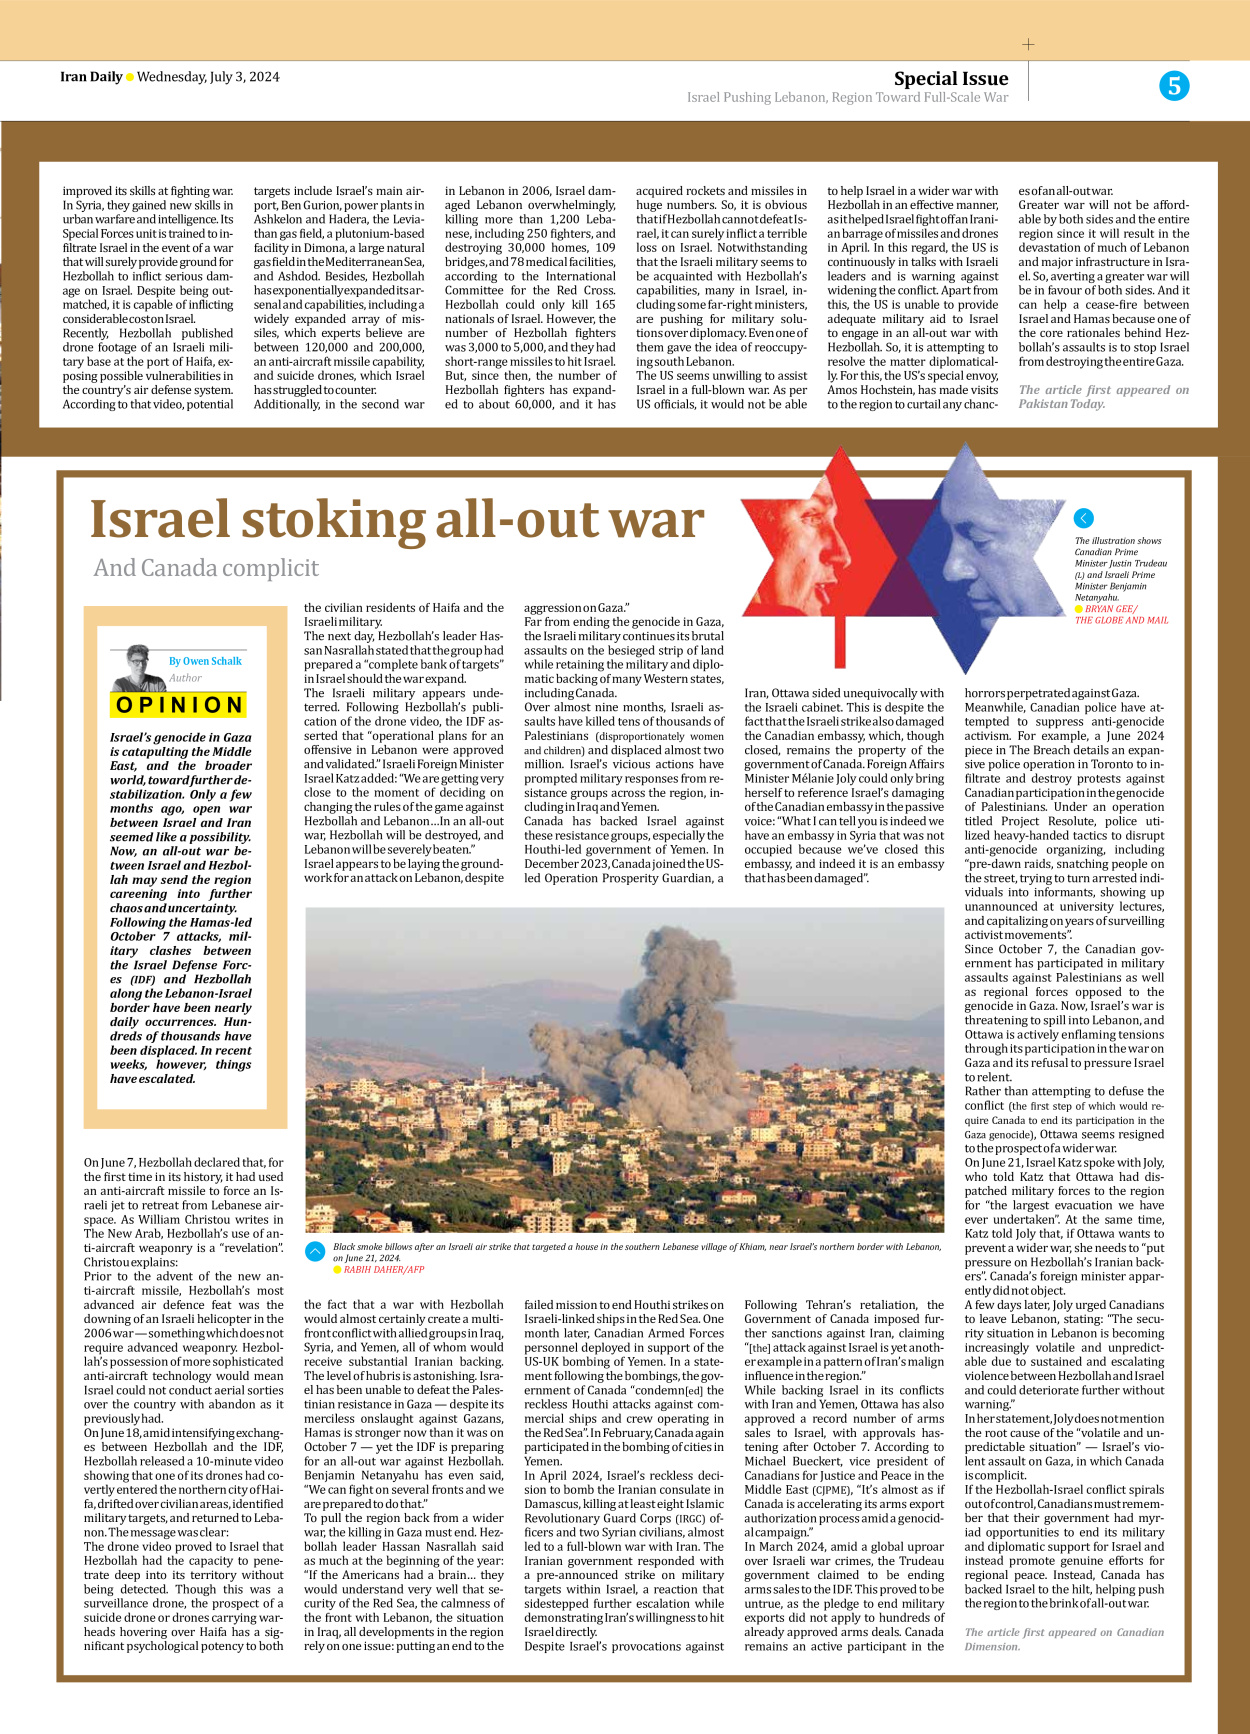 Iran Daily - Number Seven Thousand Five Hundred and Ninety Five - 03 July 2024 - Page 5